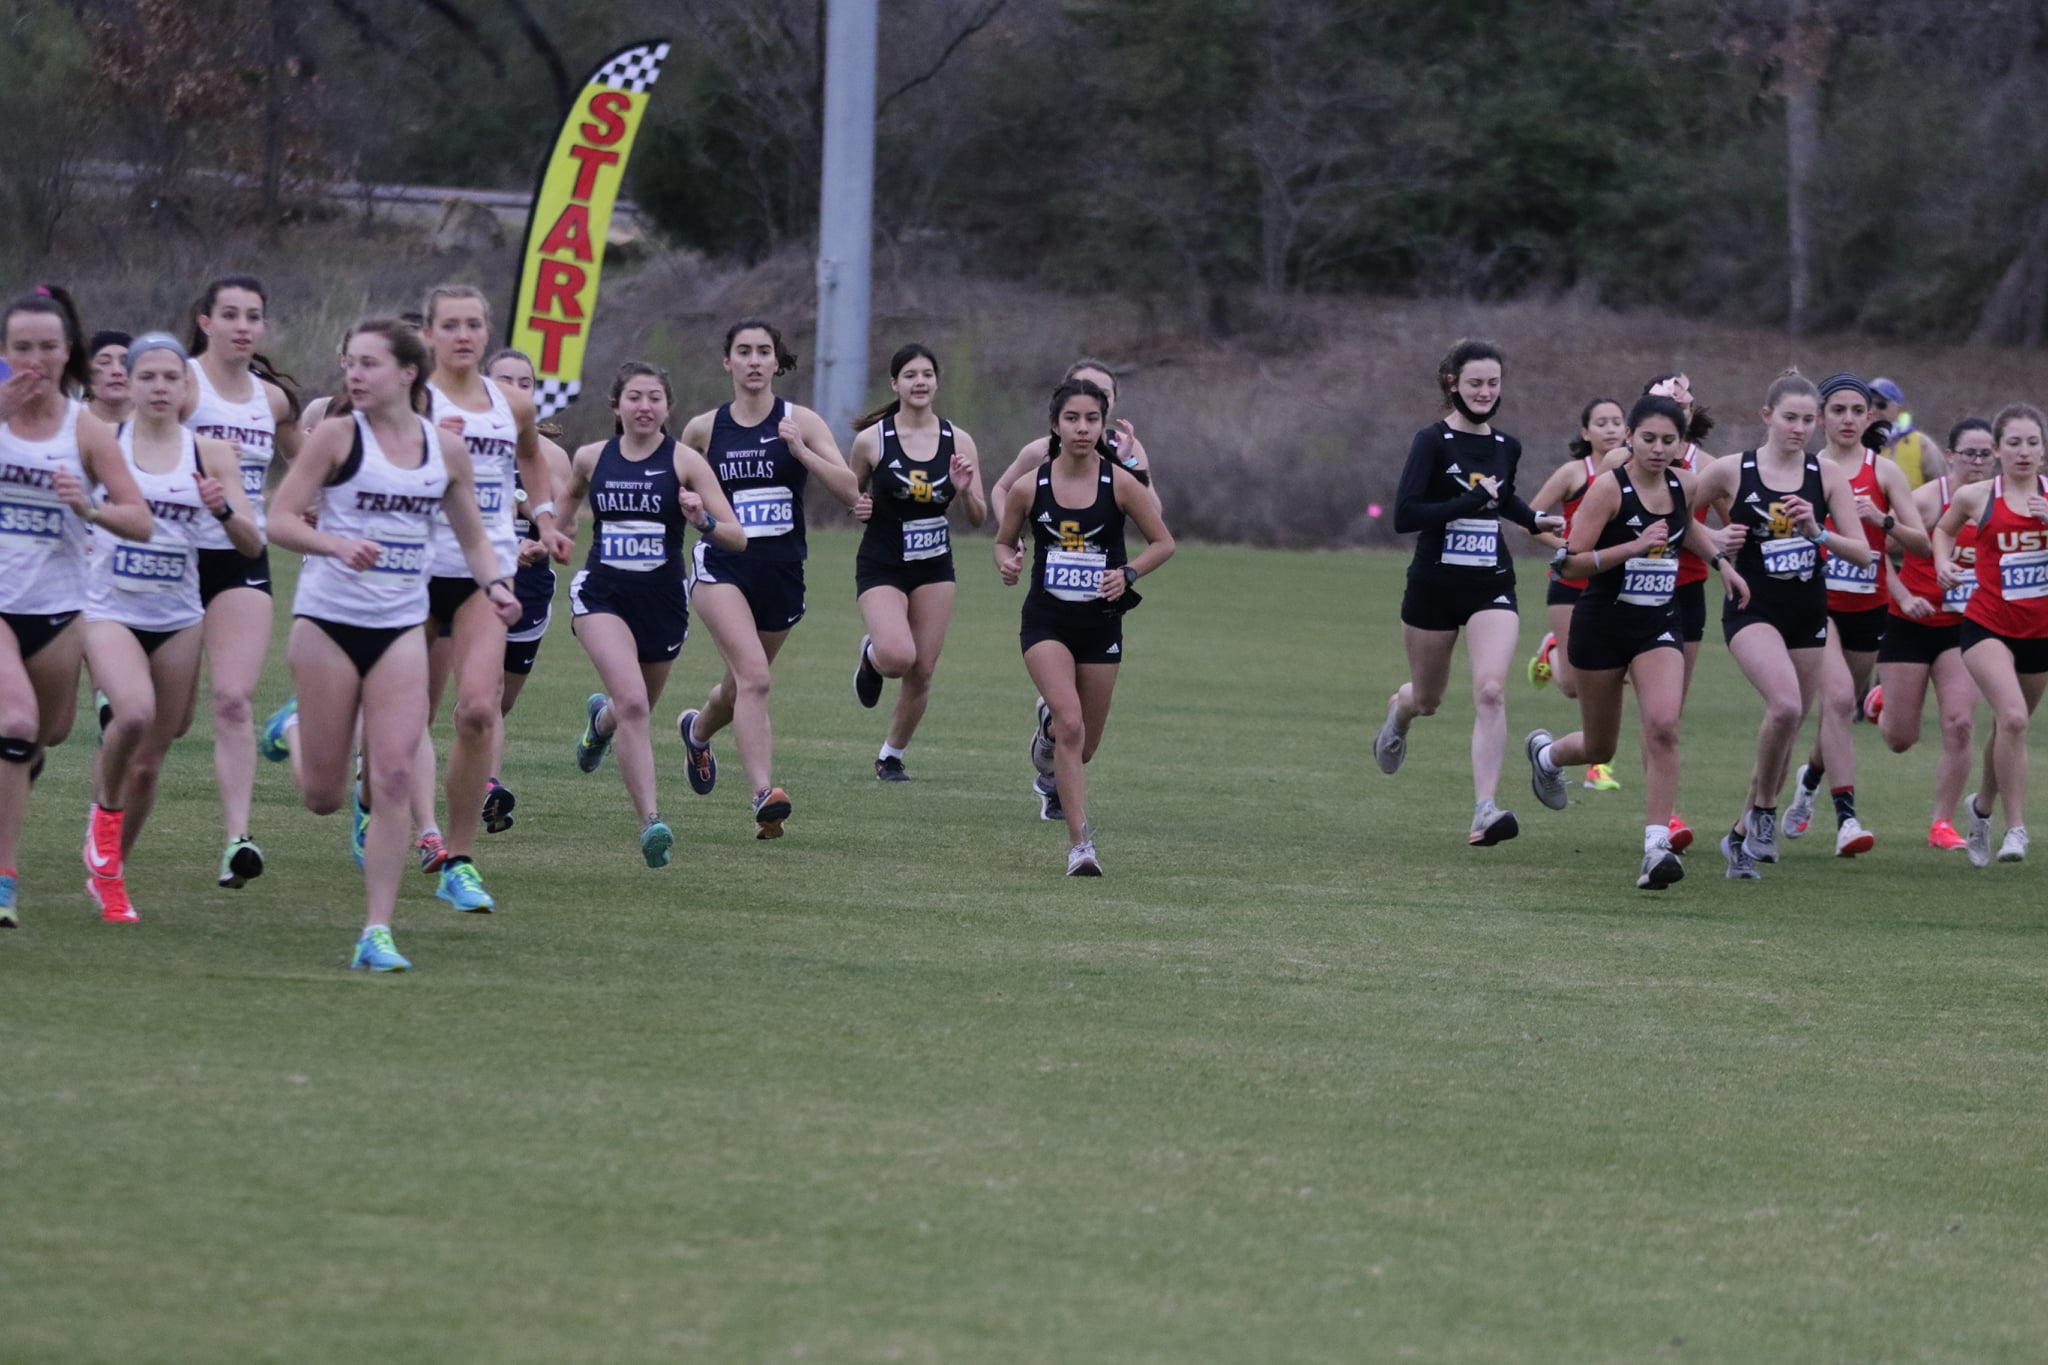 Women's Cross Country Named to USTFCCCA All-Academic Teams